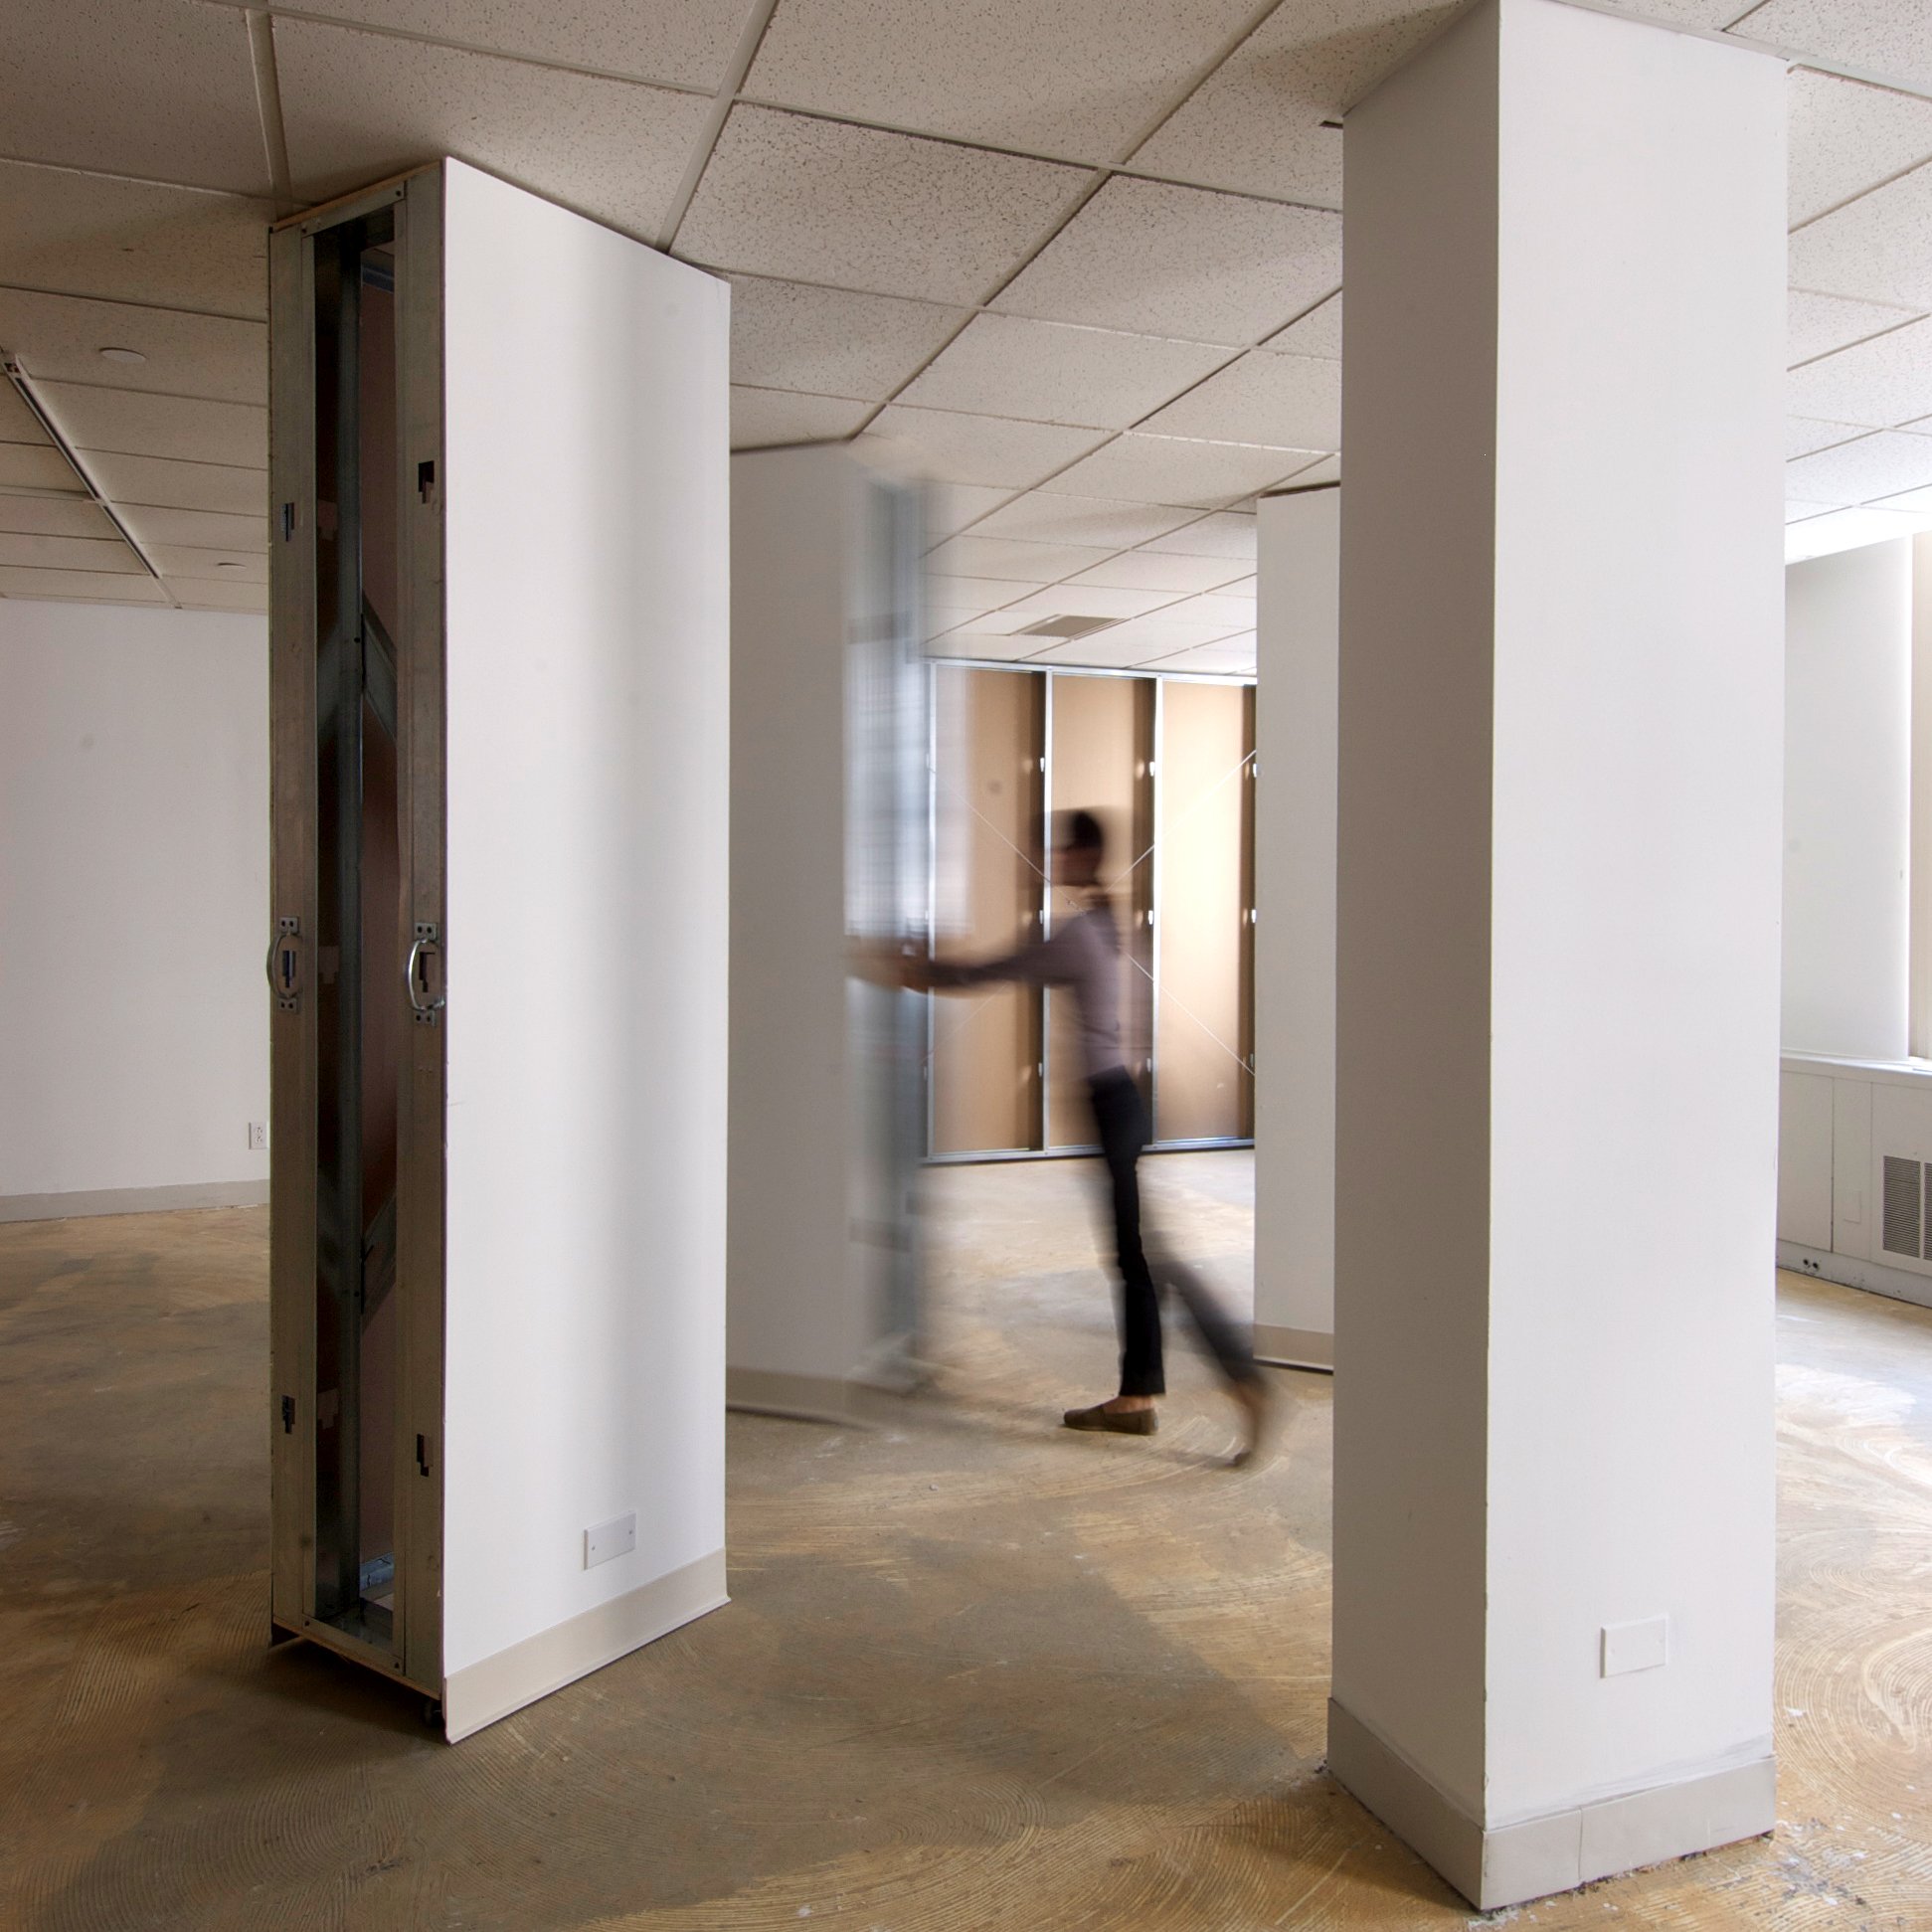   Untitled (columns) , 2010, mixed media participatory installation, 18x24x96 each. 